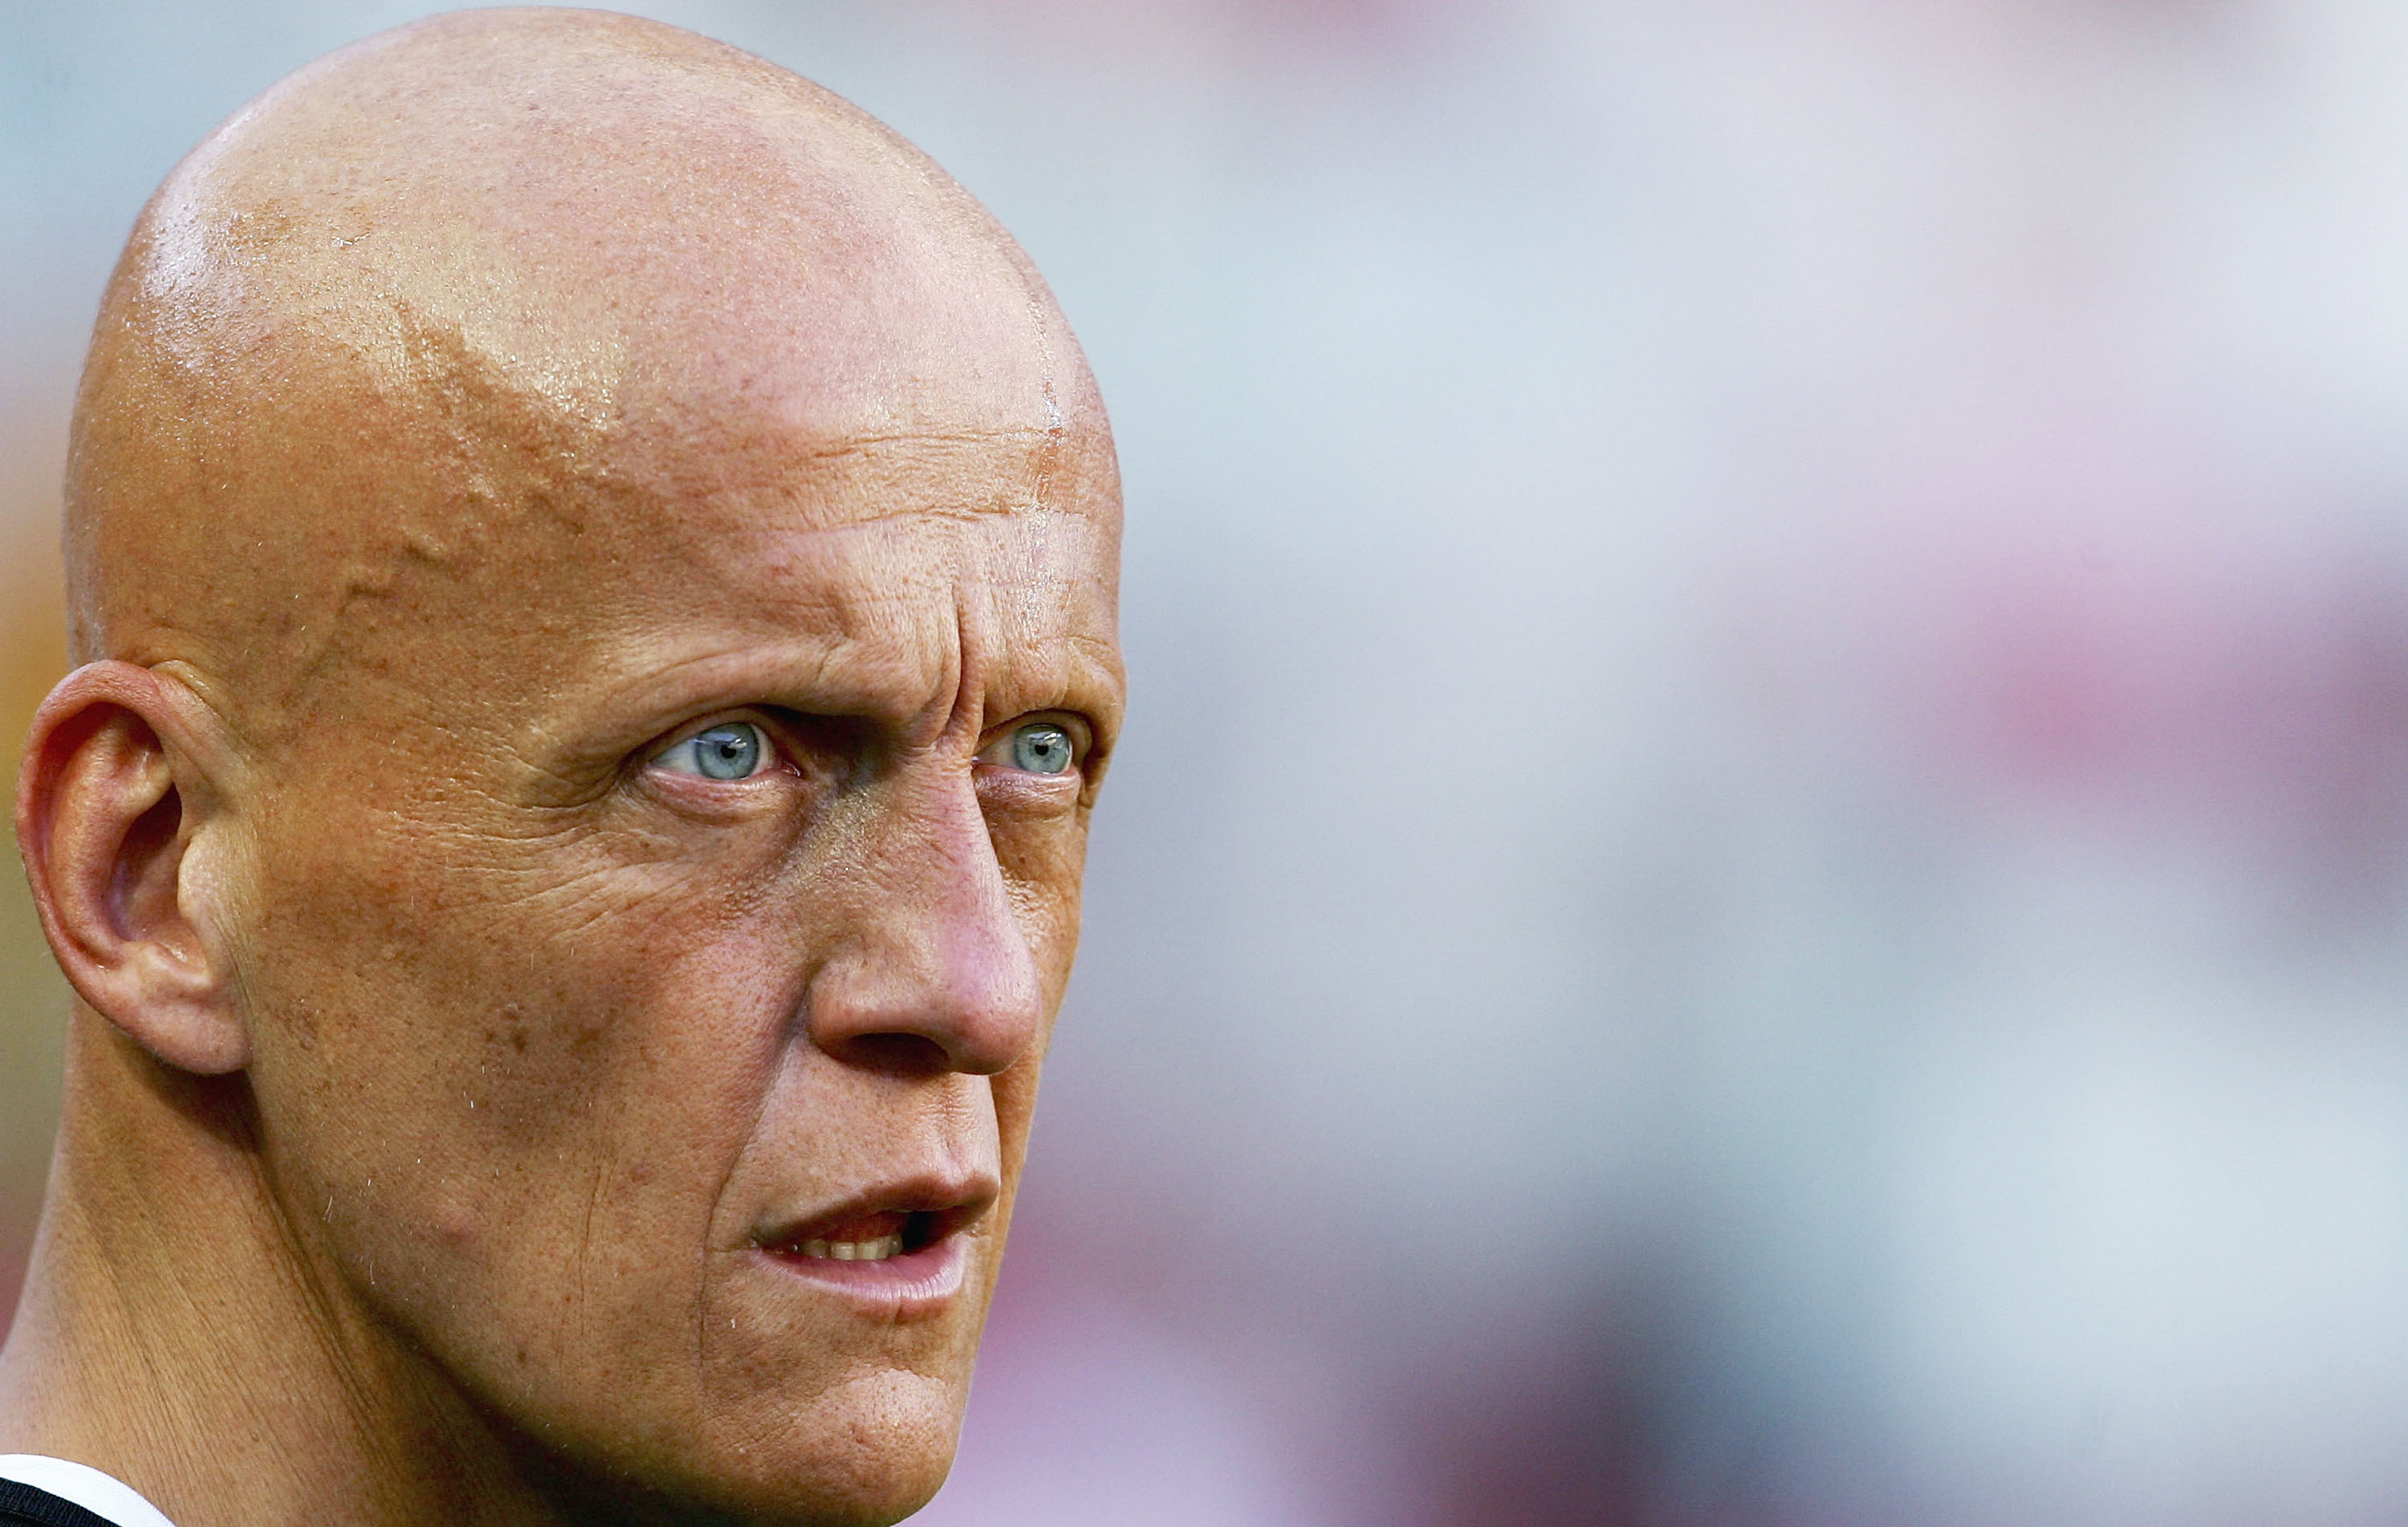 LISBON, PORTUGAL - JUNE 4:  Referee Pierluigi Collina watches the 2006 World Cup, Group 3 qualification match between Portugal and Slovakia at the Estadio da Luz on June 4, 2005 in Lisbon, Portugal. (Photo by Jamie McDonald/Getty Images)